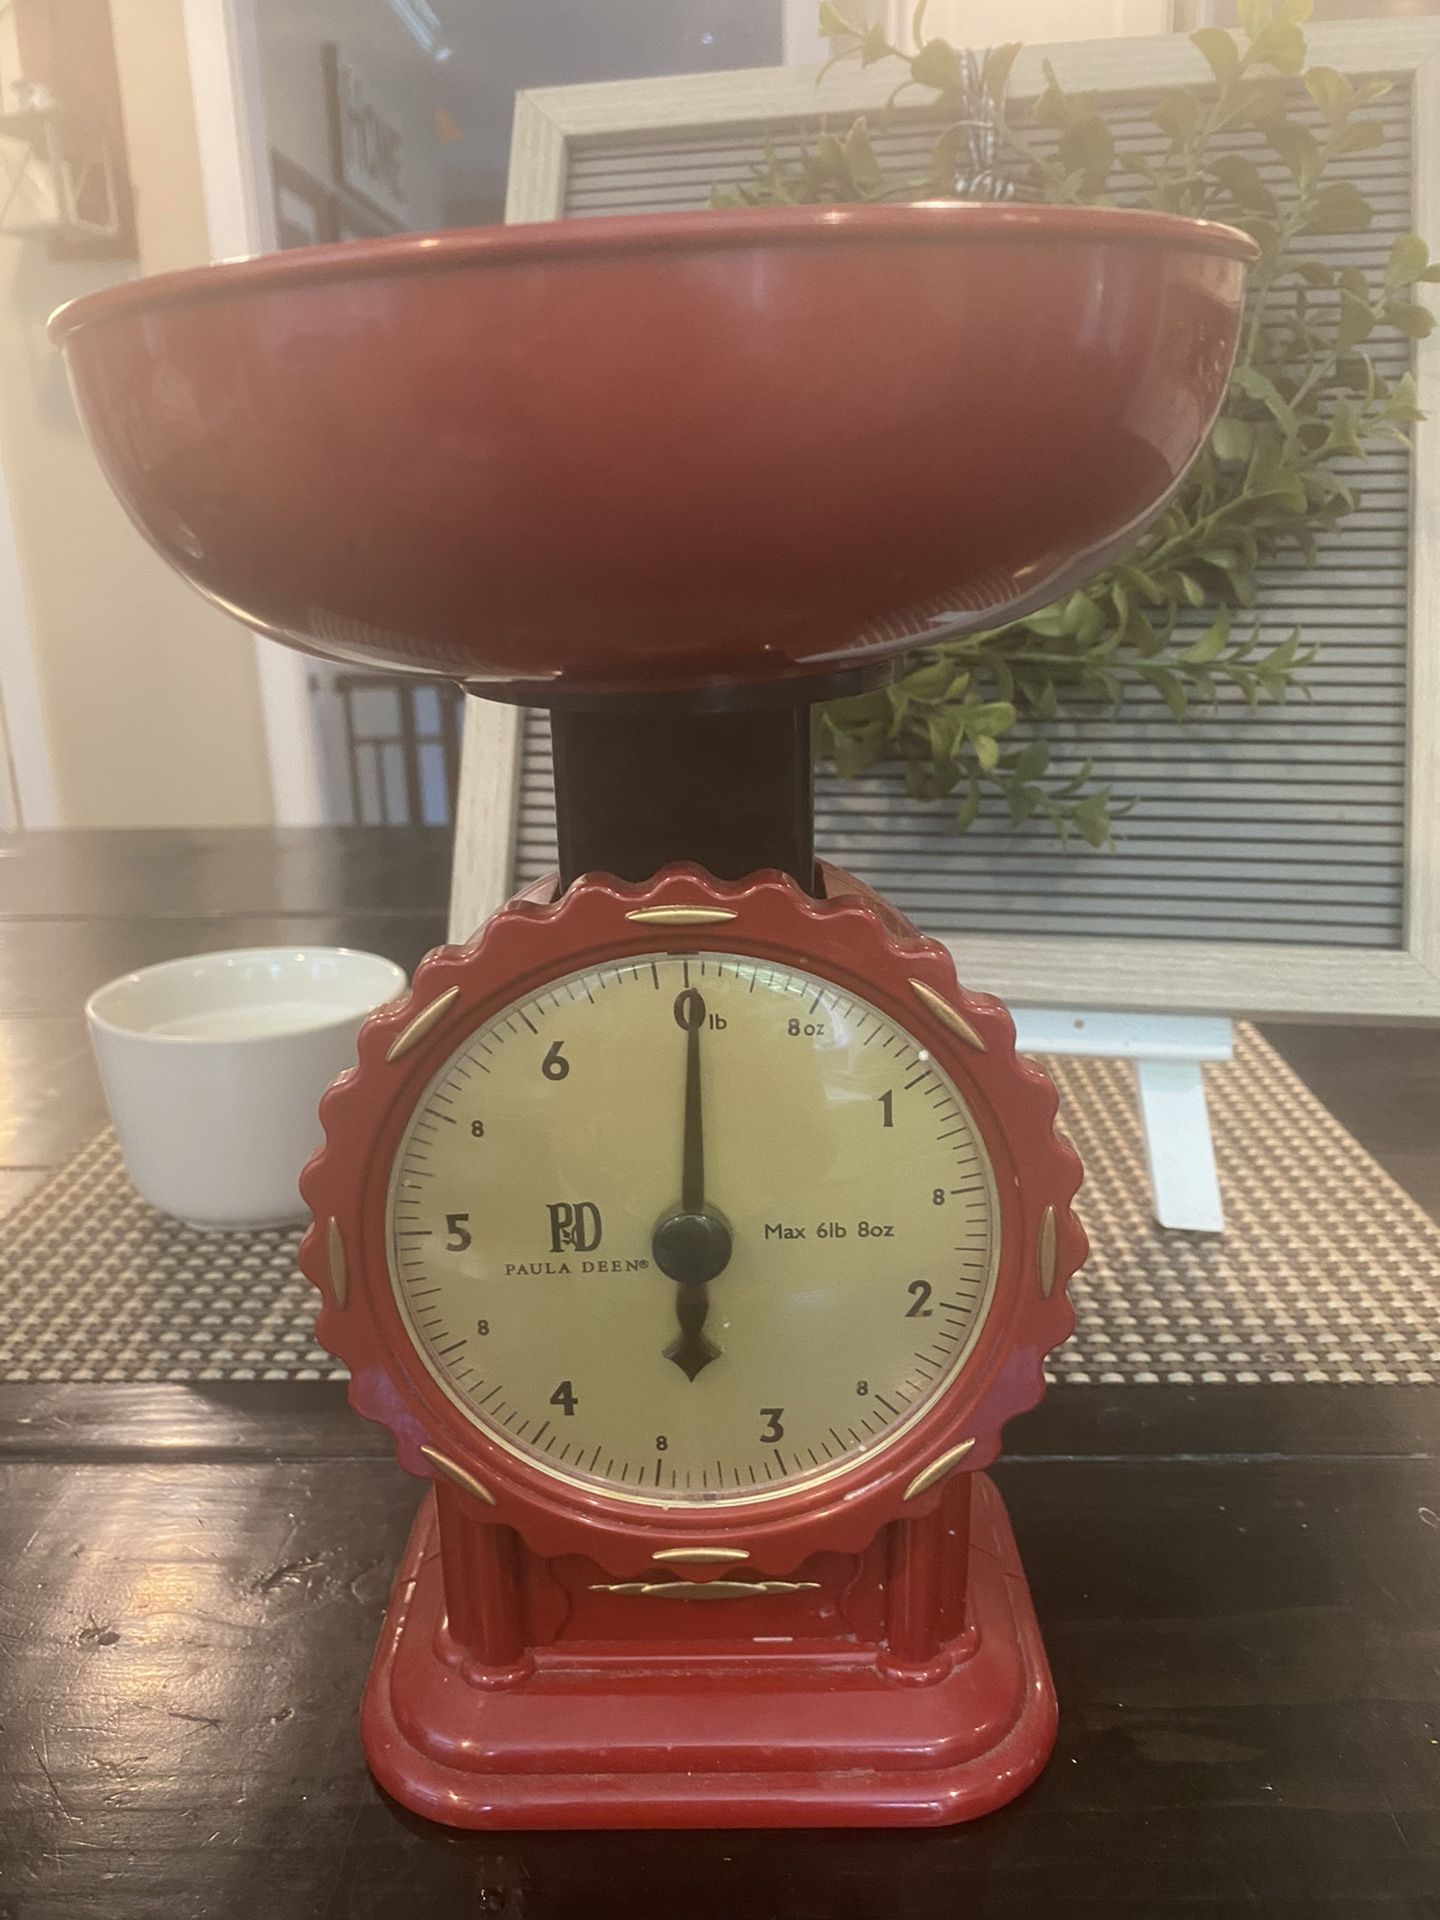 Food scale, red, vintage style